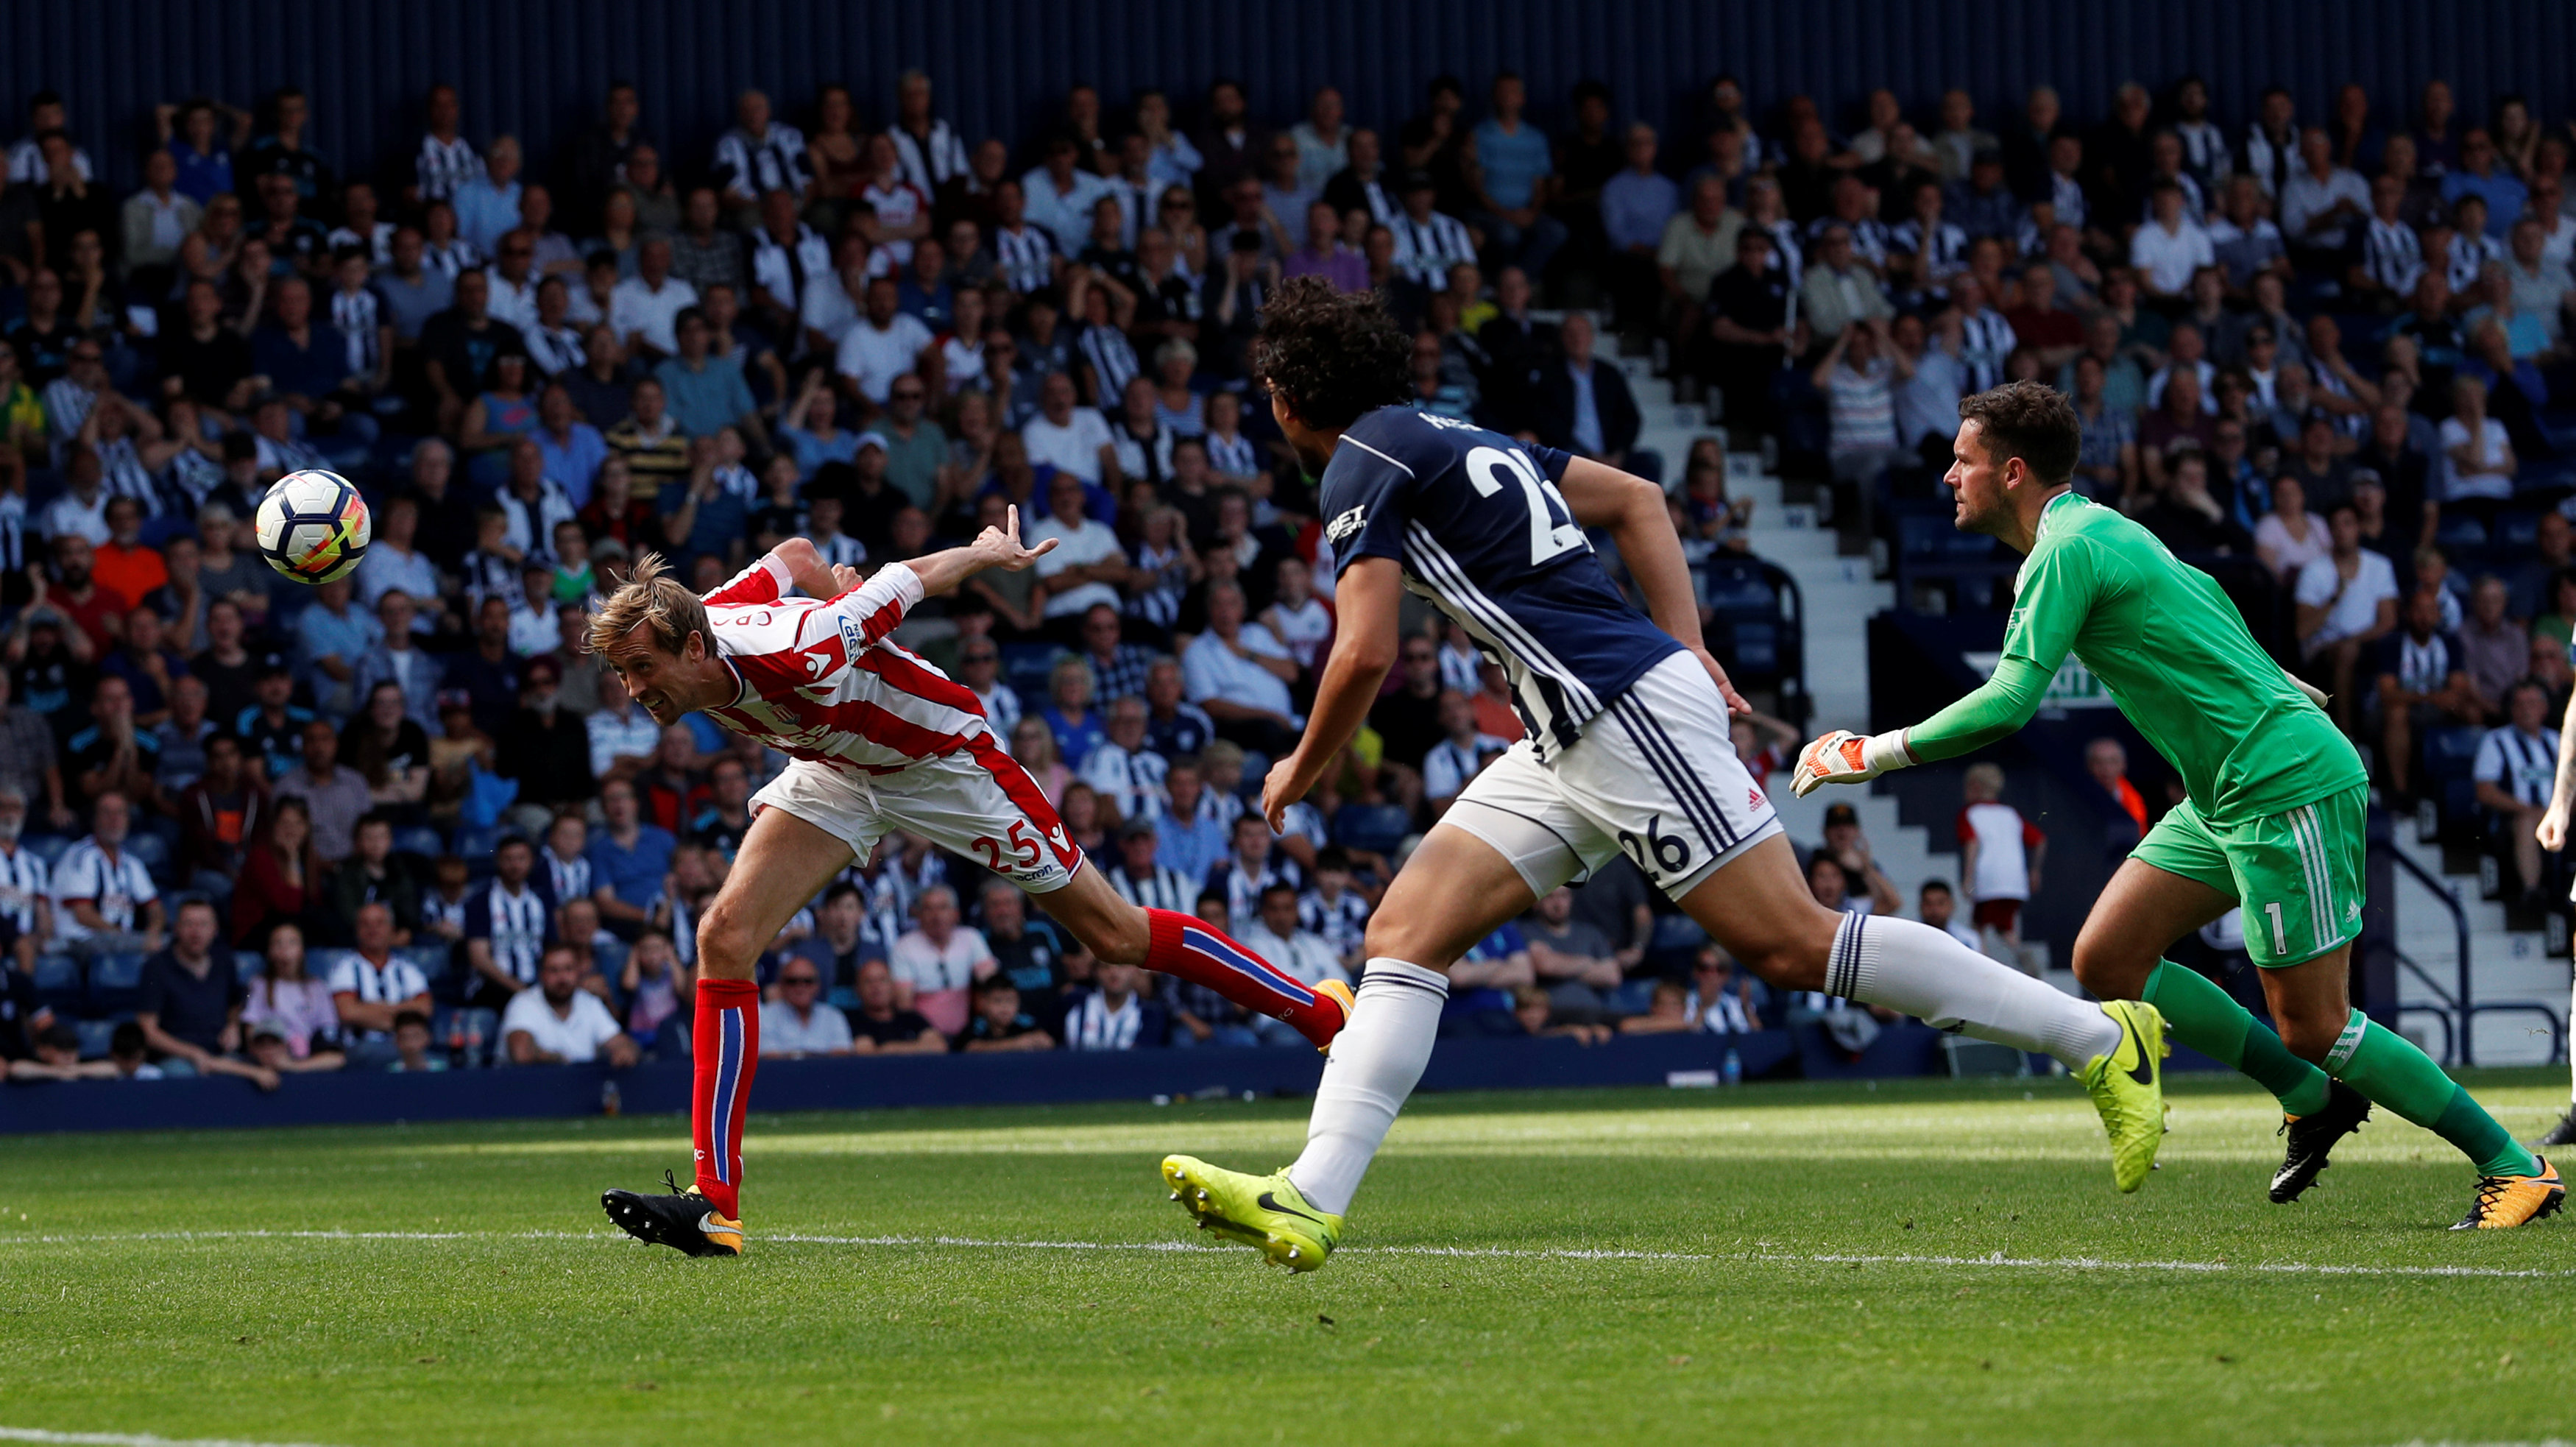 Football: Defensive error costs West Brom victory over Stoke City